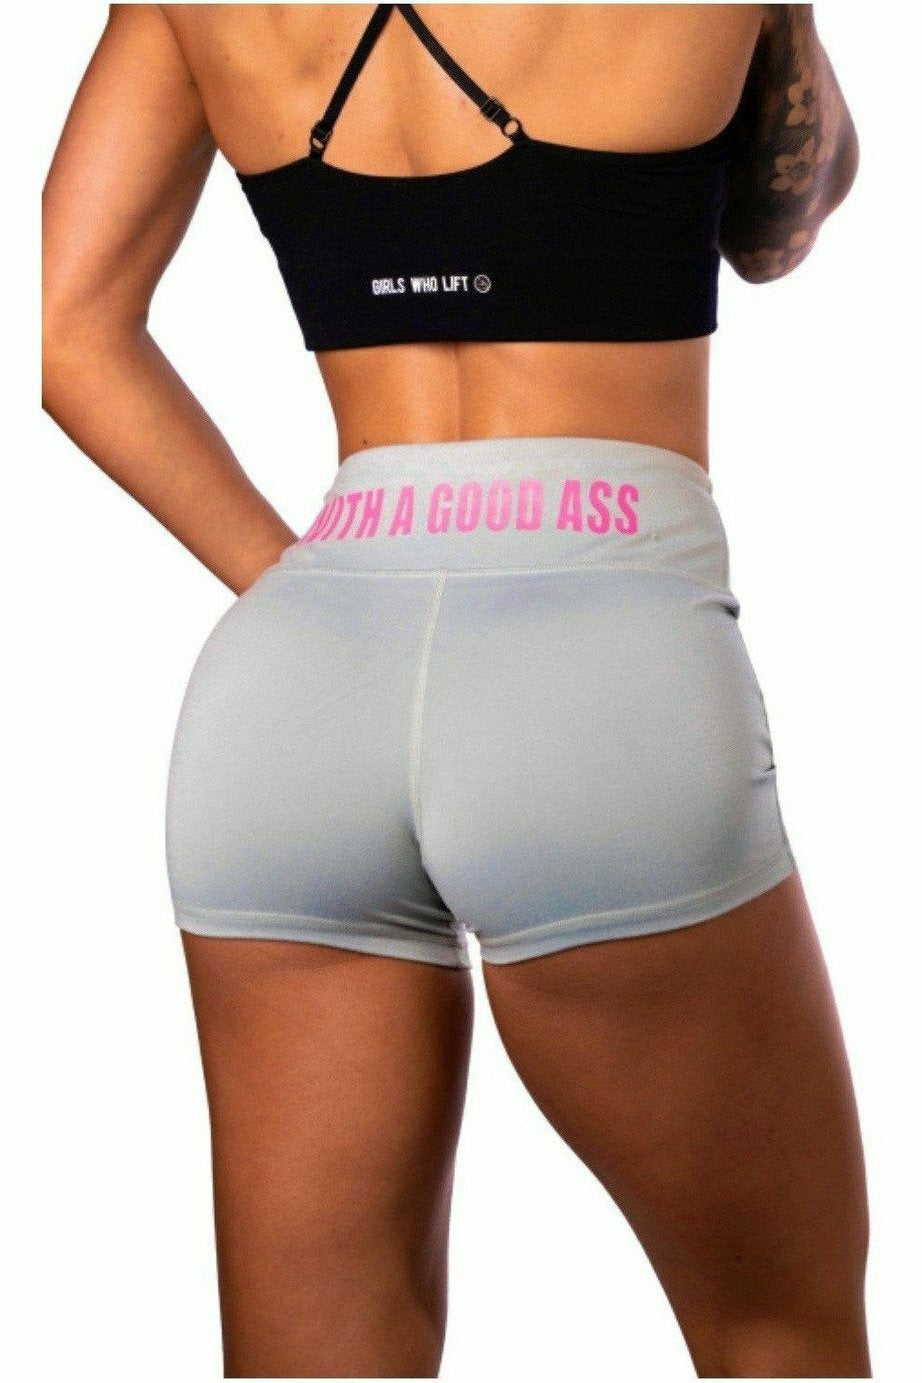 dale woodworth recommends Big Ass In Booty Shorts